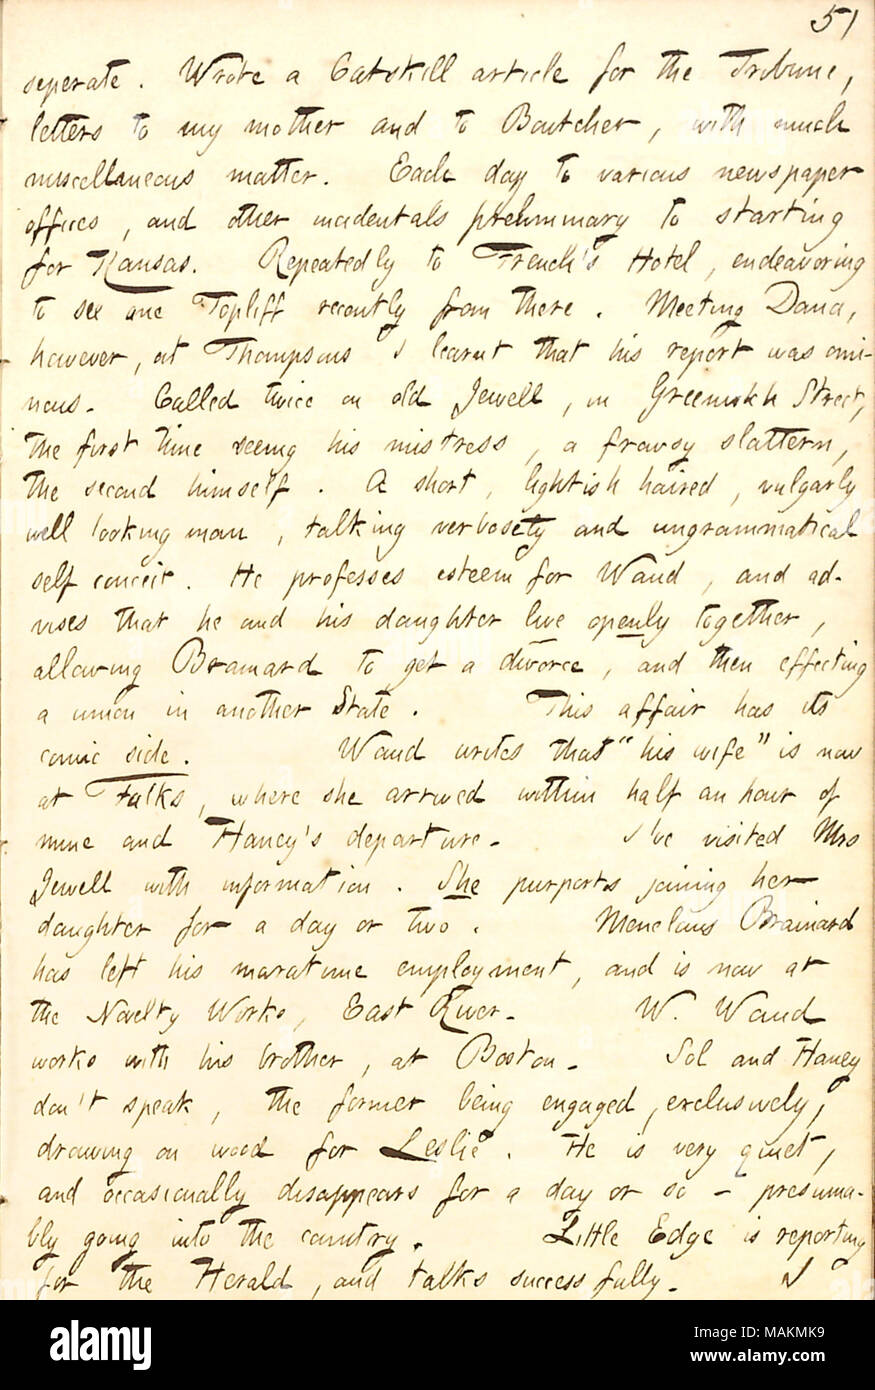 Mentions calling on Charles Jewell, who suggests that Alf Waud and his daughter, Mary, live together openly so that Albert Brainard can get a divorce from her.  Transcription: separate. Wrote a Catskill article for the Tribune, letters to my mother [Naomi Butler Gunn] and to [William] Boutcher, with much miscellaneous matter. Each day to various newspaper offices, and other incidentals preliminary to starting for Kansas. Repeatedly to French's Hotel, endeavoring to see one Topliff recently from there. Meeting [Charles A.] Dana, however, at Thompsons I learnt that his report was ominous. Called Stock Photo